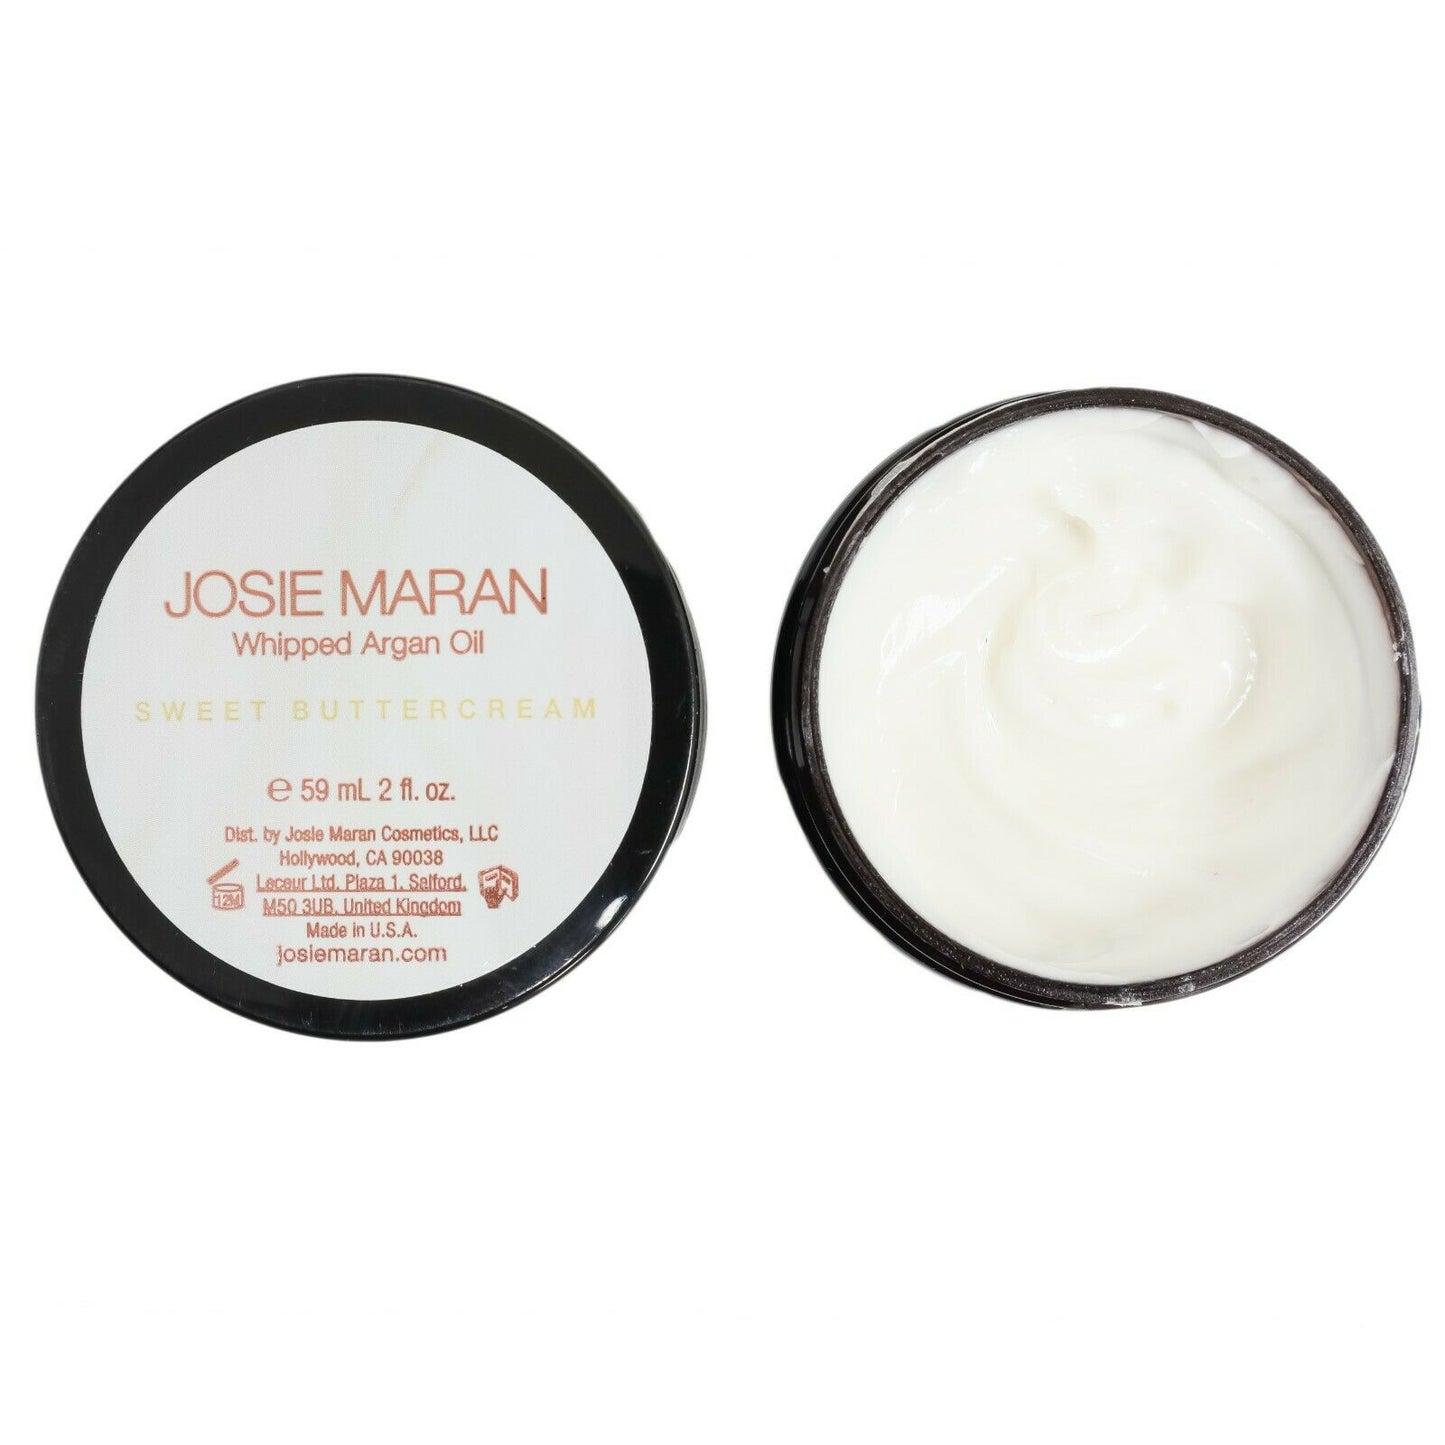 Josie Maran Whipped Argan Oil In A Variety Of Scents